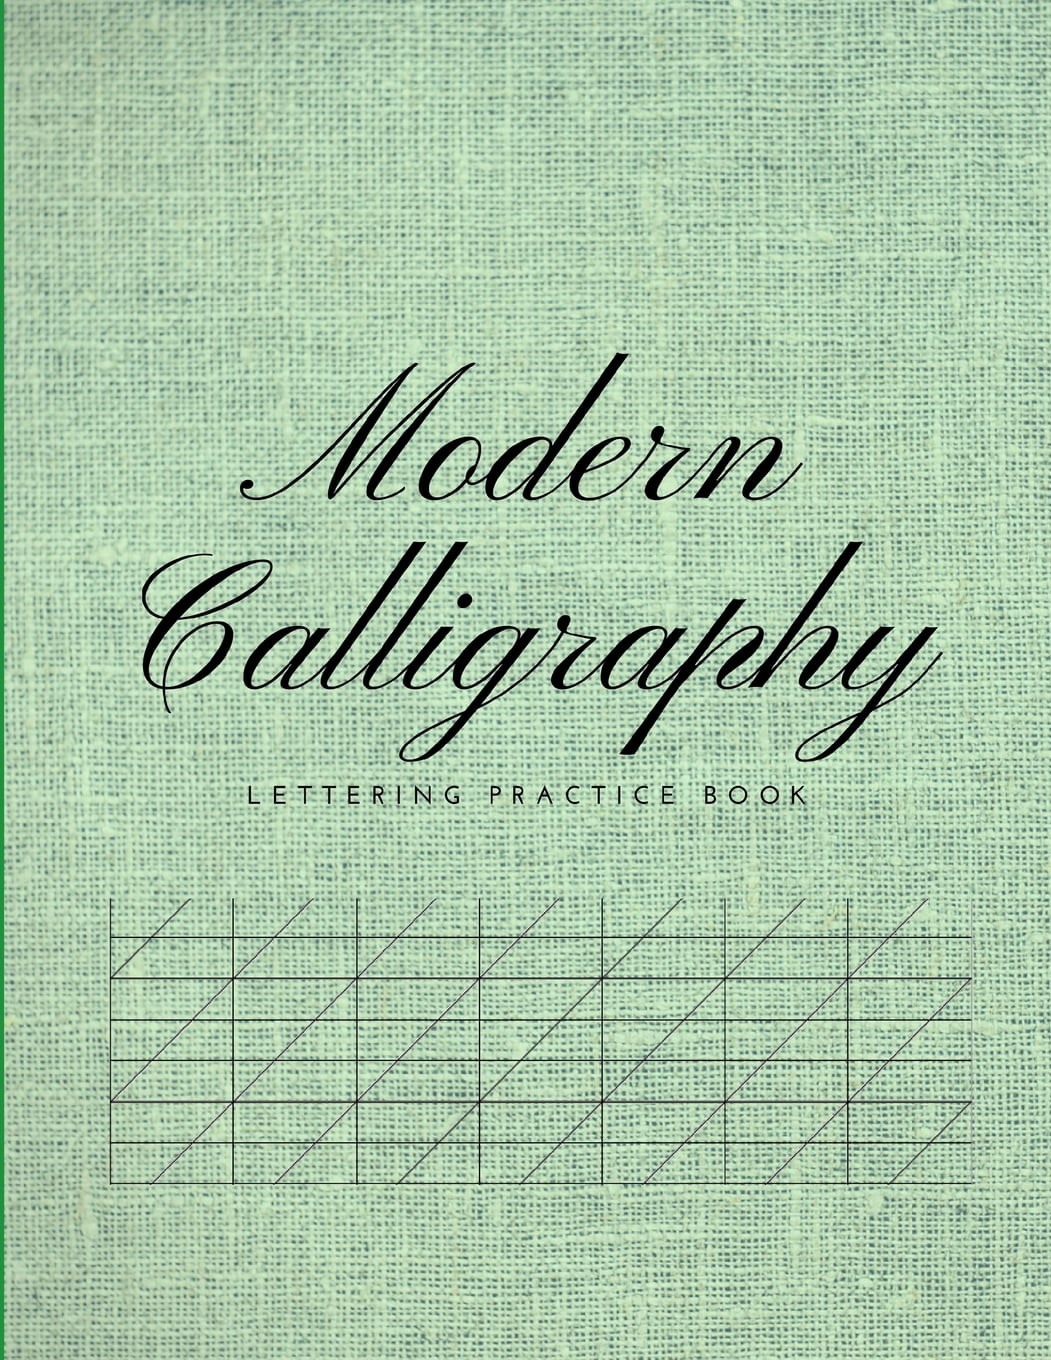 Online Script, Modern Calligraphy by Graphicdeal